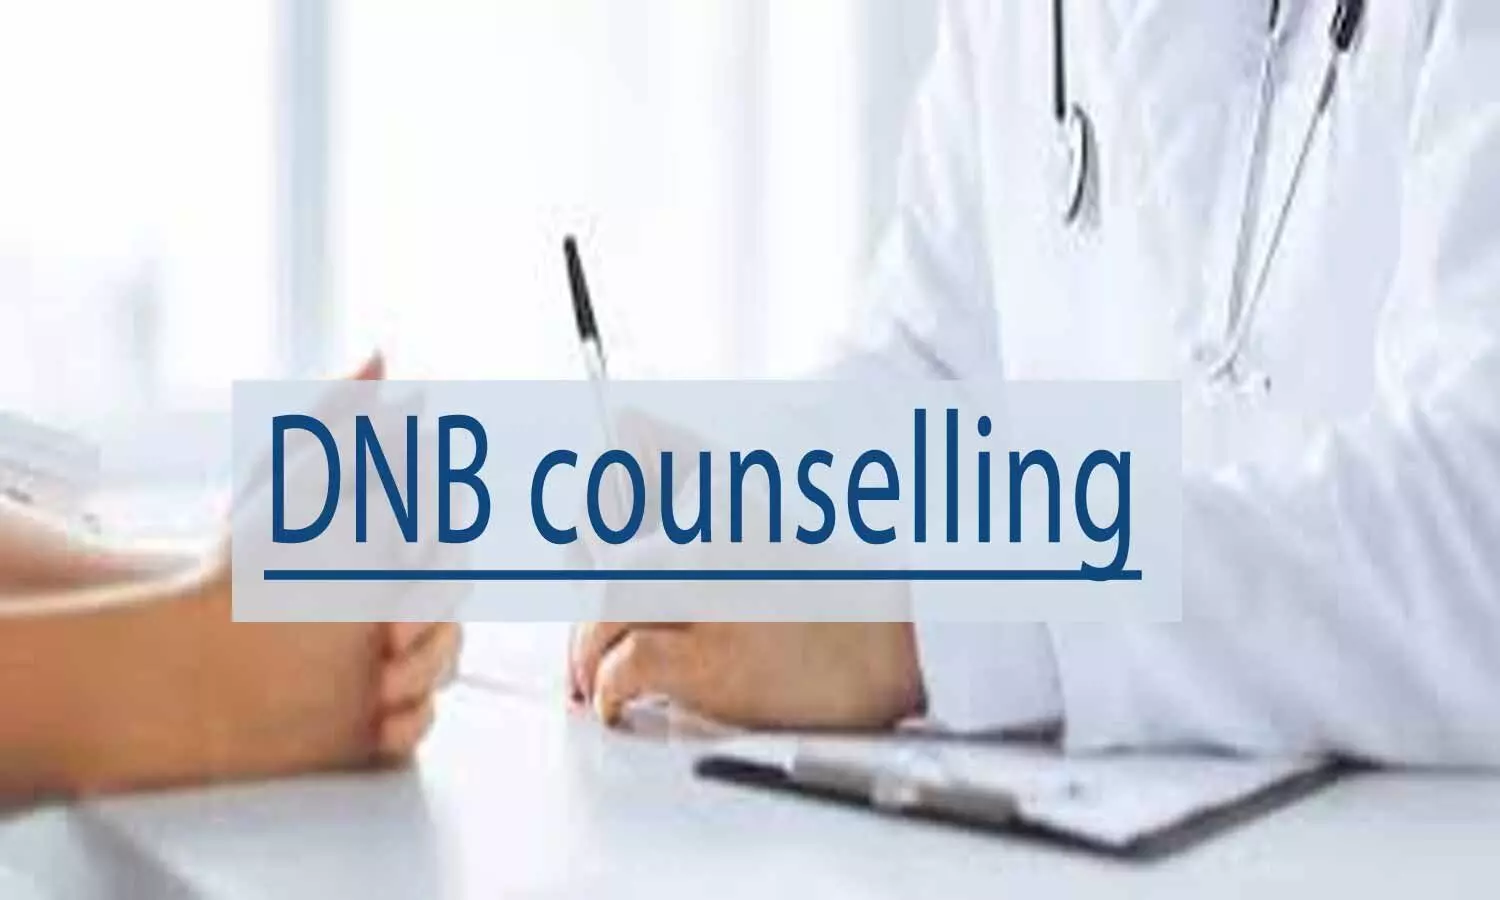 Seat Locking in DNB Counselling: NBE clarifies on seat preferences, inaction